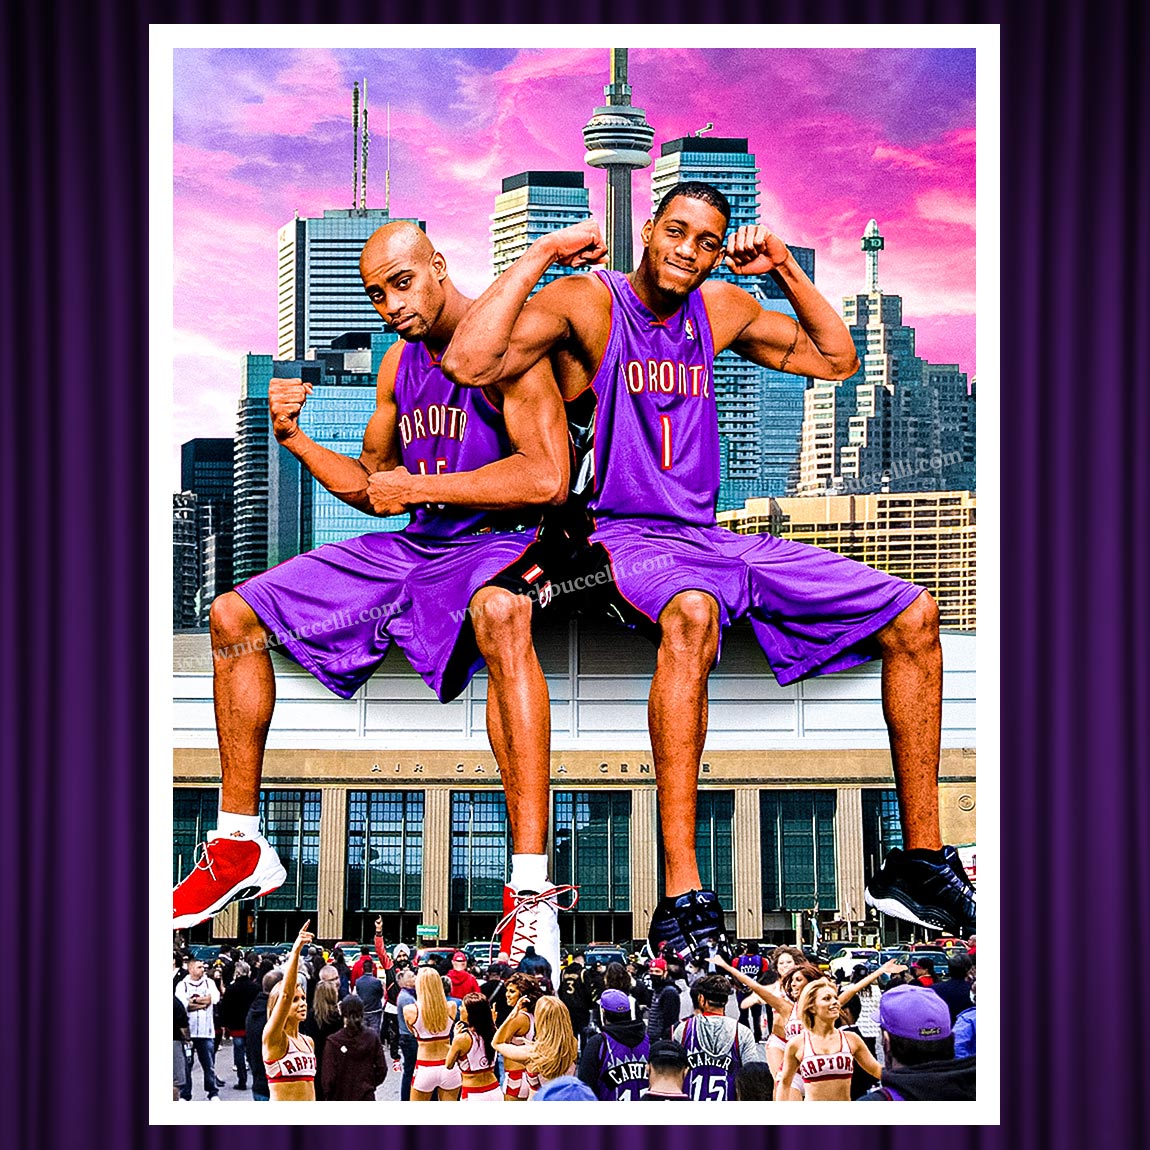 'Vince Carter and Tracy McGrady in Toronto' print available at nickbuccelli.com
.
#NBA #VinceCarter #TracyMcGrady #Toronto #Raptors #basketball #city #print #poster #illustration #art #artwork #graphic #design #AirCanadaCentre